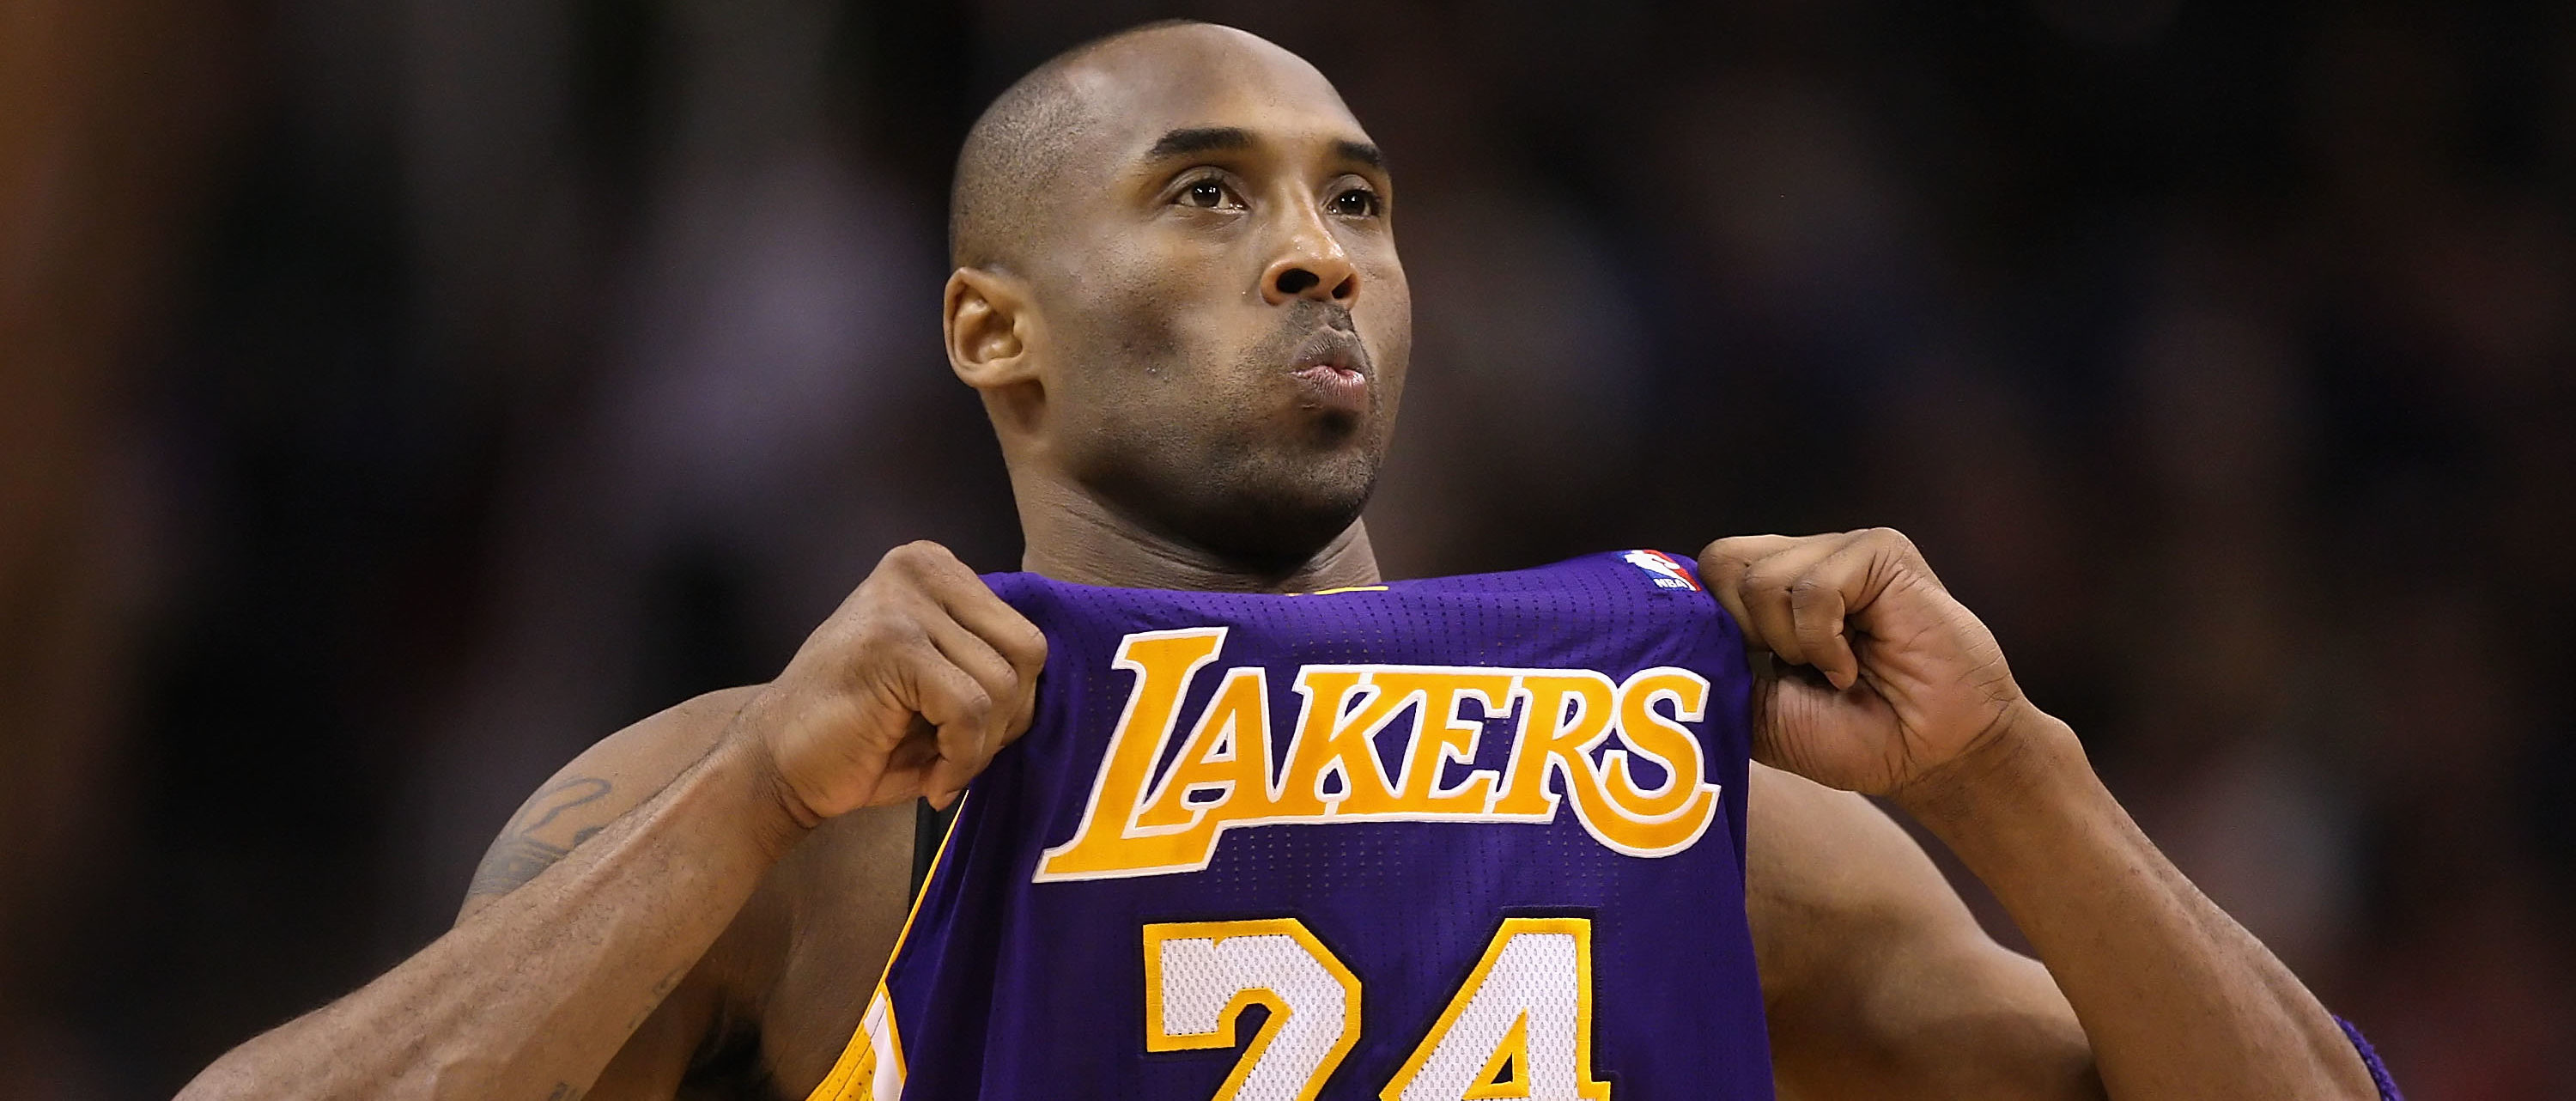 Draft of Children’s Book Co-Written By Kobe Bryant Scrapped Hours After the NBA ...3000 x 1282